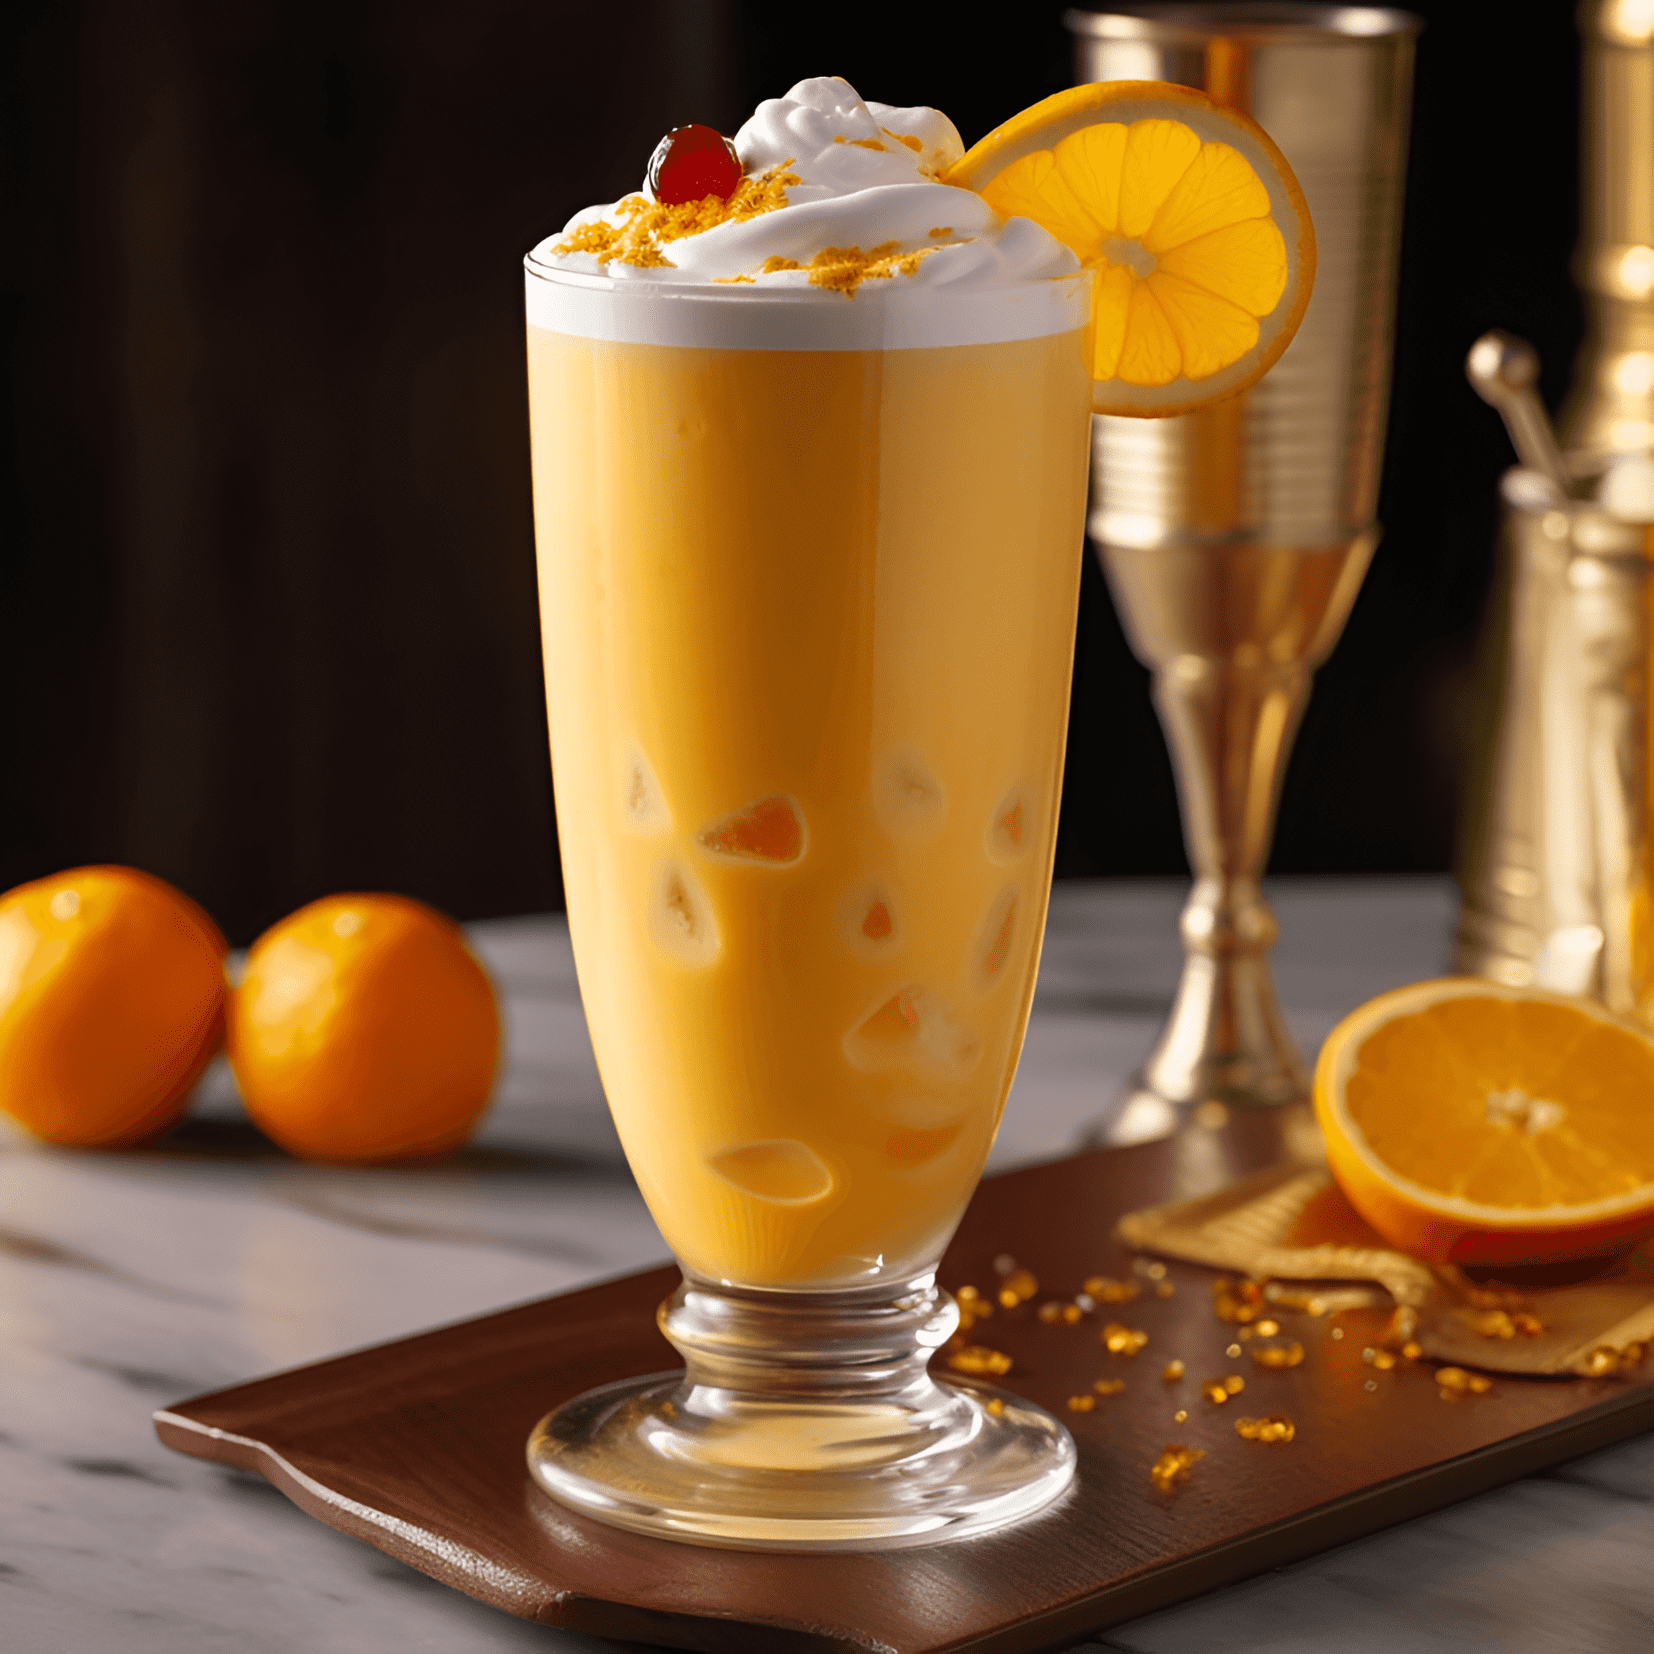 The Orange Julius cocktail has a sweet, tangy, and creamy taste with a hint of vanilla. It is light and refreshing, making it perfect for a warm summer day or as a dessert drink.